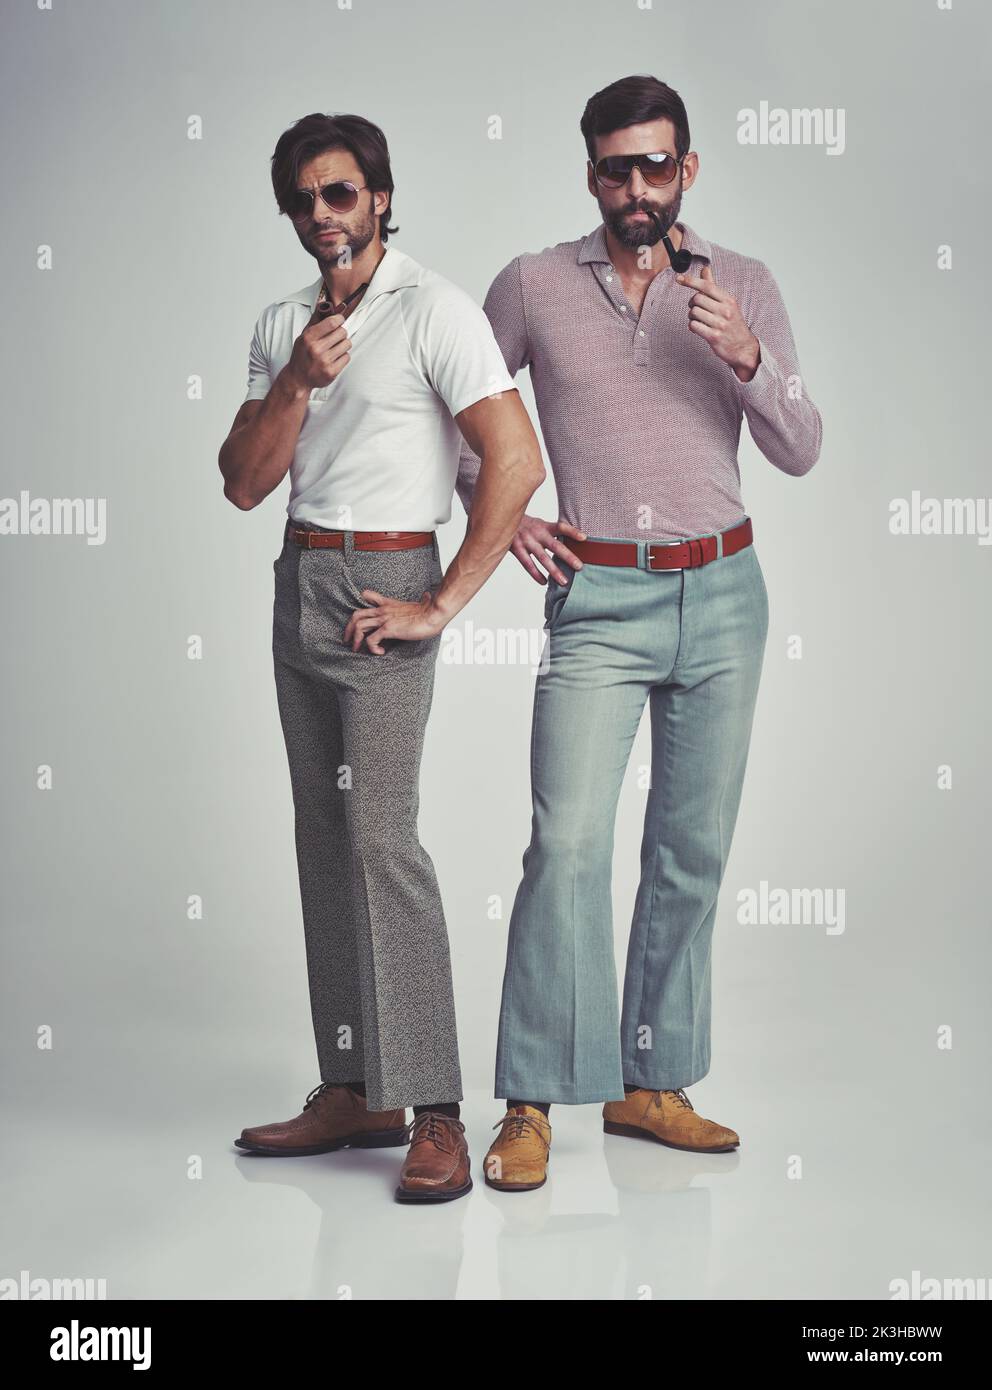 We know were groovy. Studio shot of two men standing together while ...